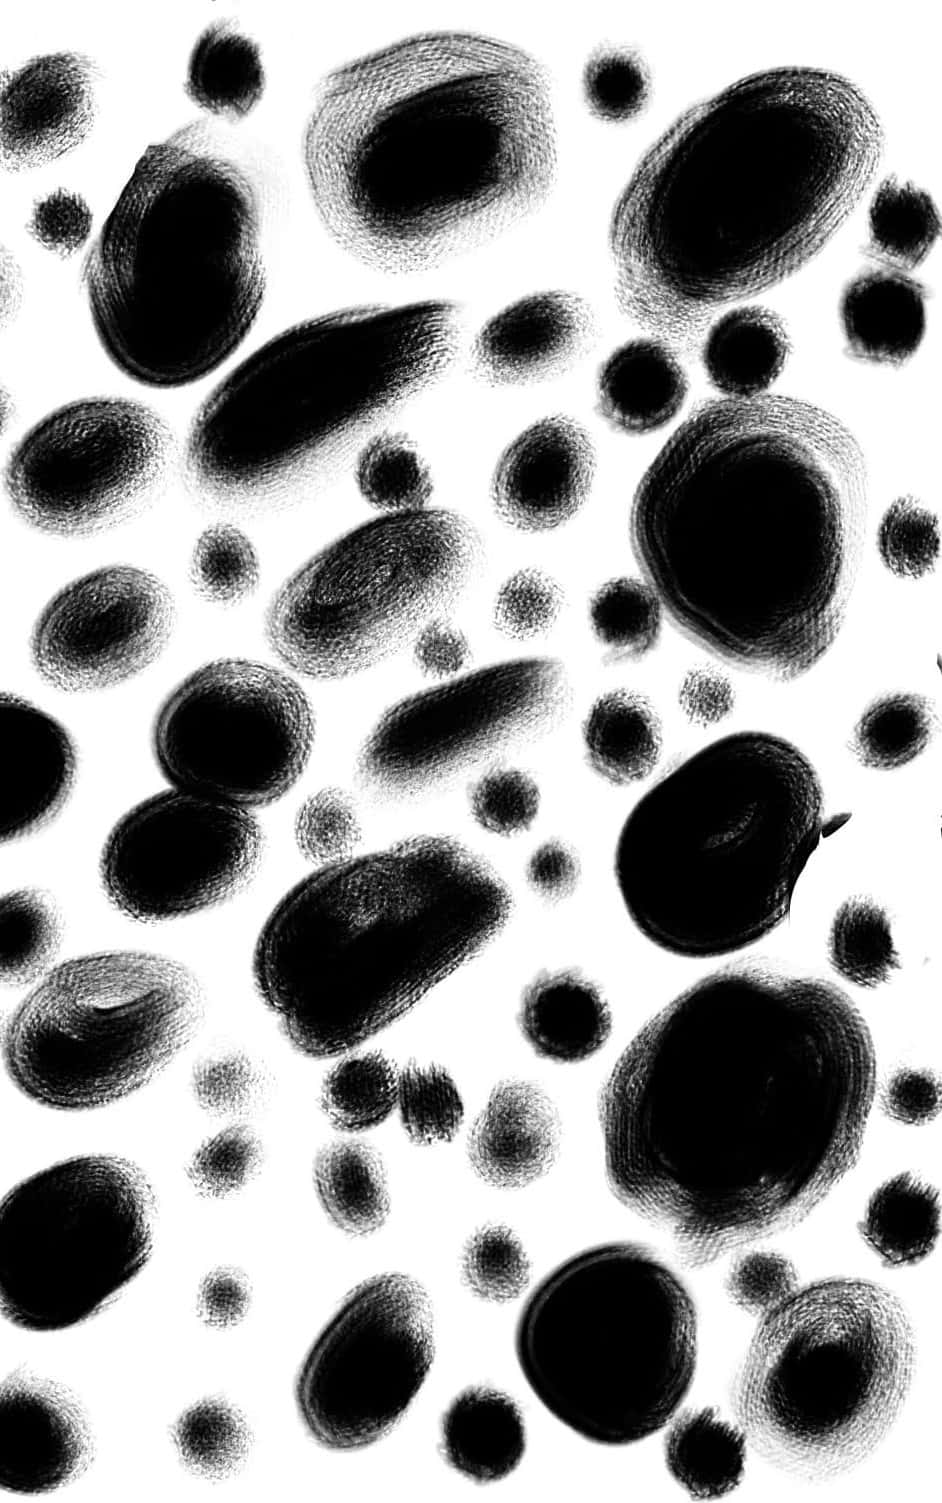 Abstract Black and White Dots Pattern Wallpaper